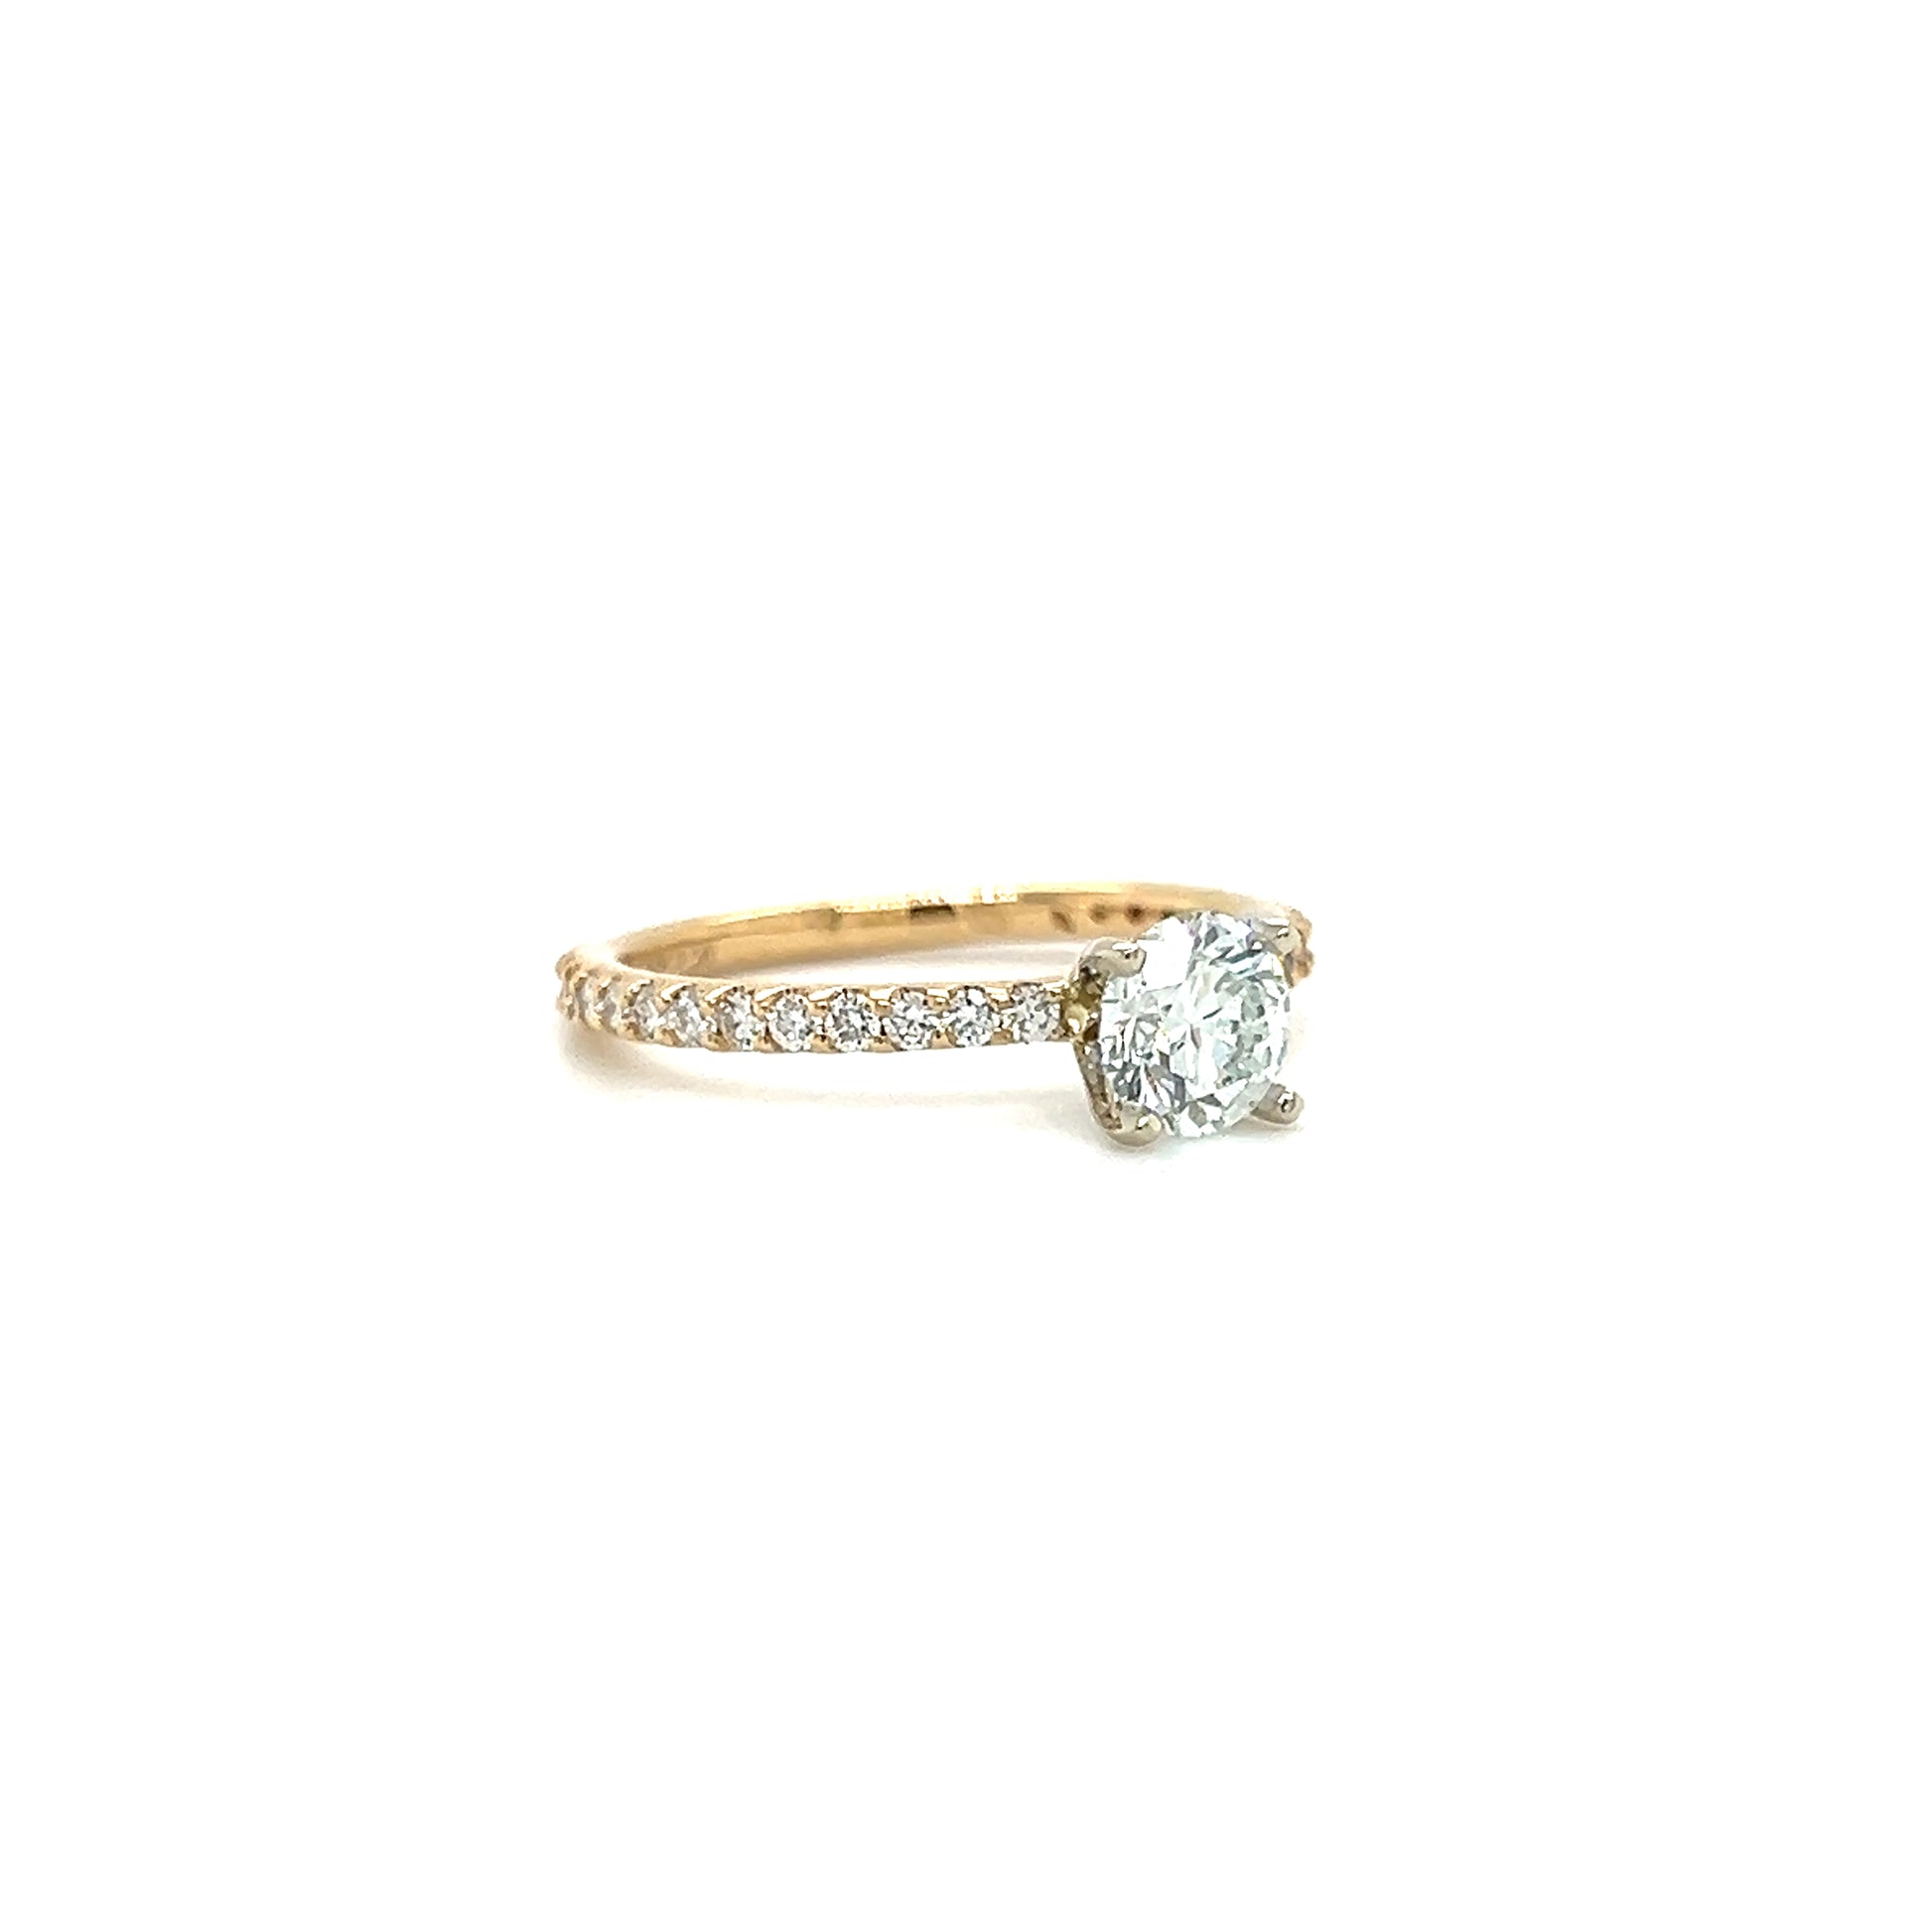 Solitaire Diamond Ring with 1.06ctw of Diamonds in 14K Yellow Gold Left Side View